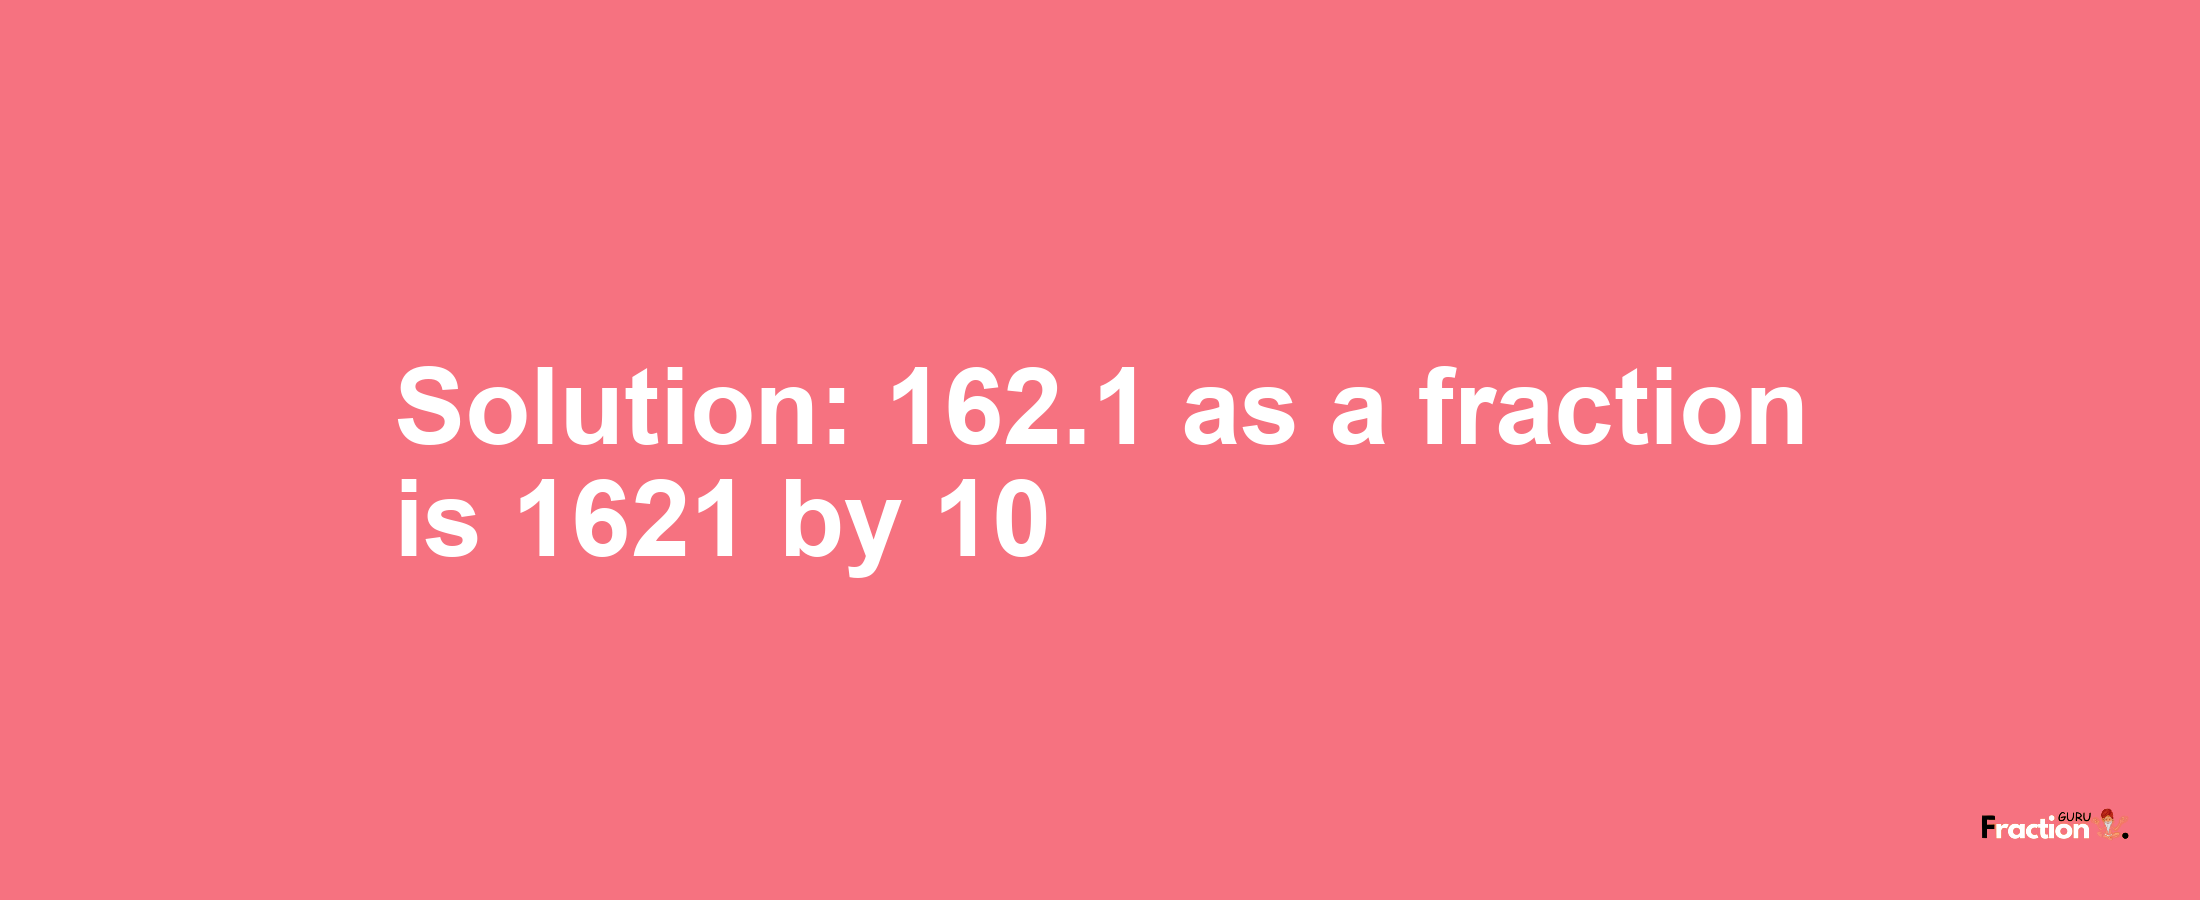 Solution:162.1 as a fraction is 1621/10